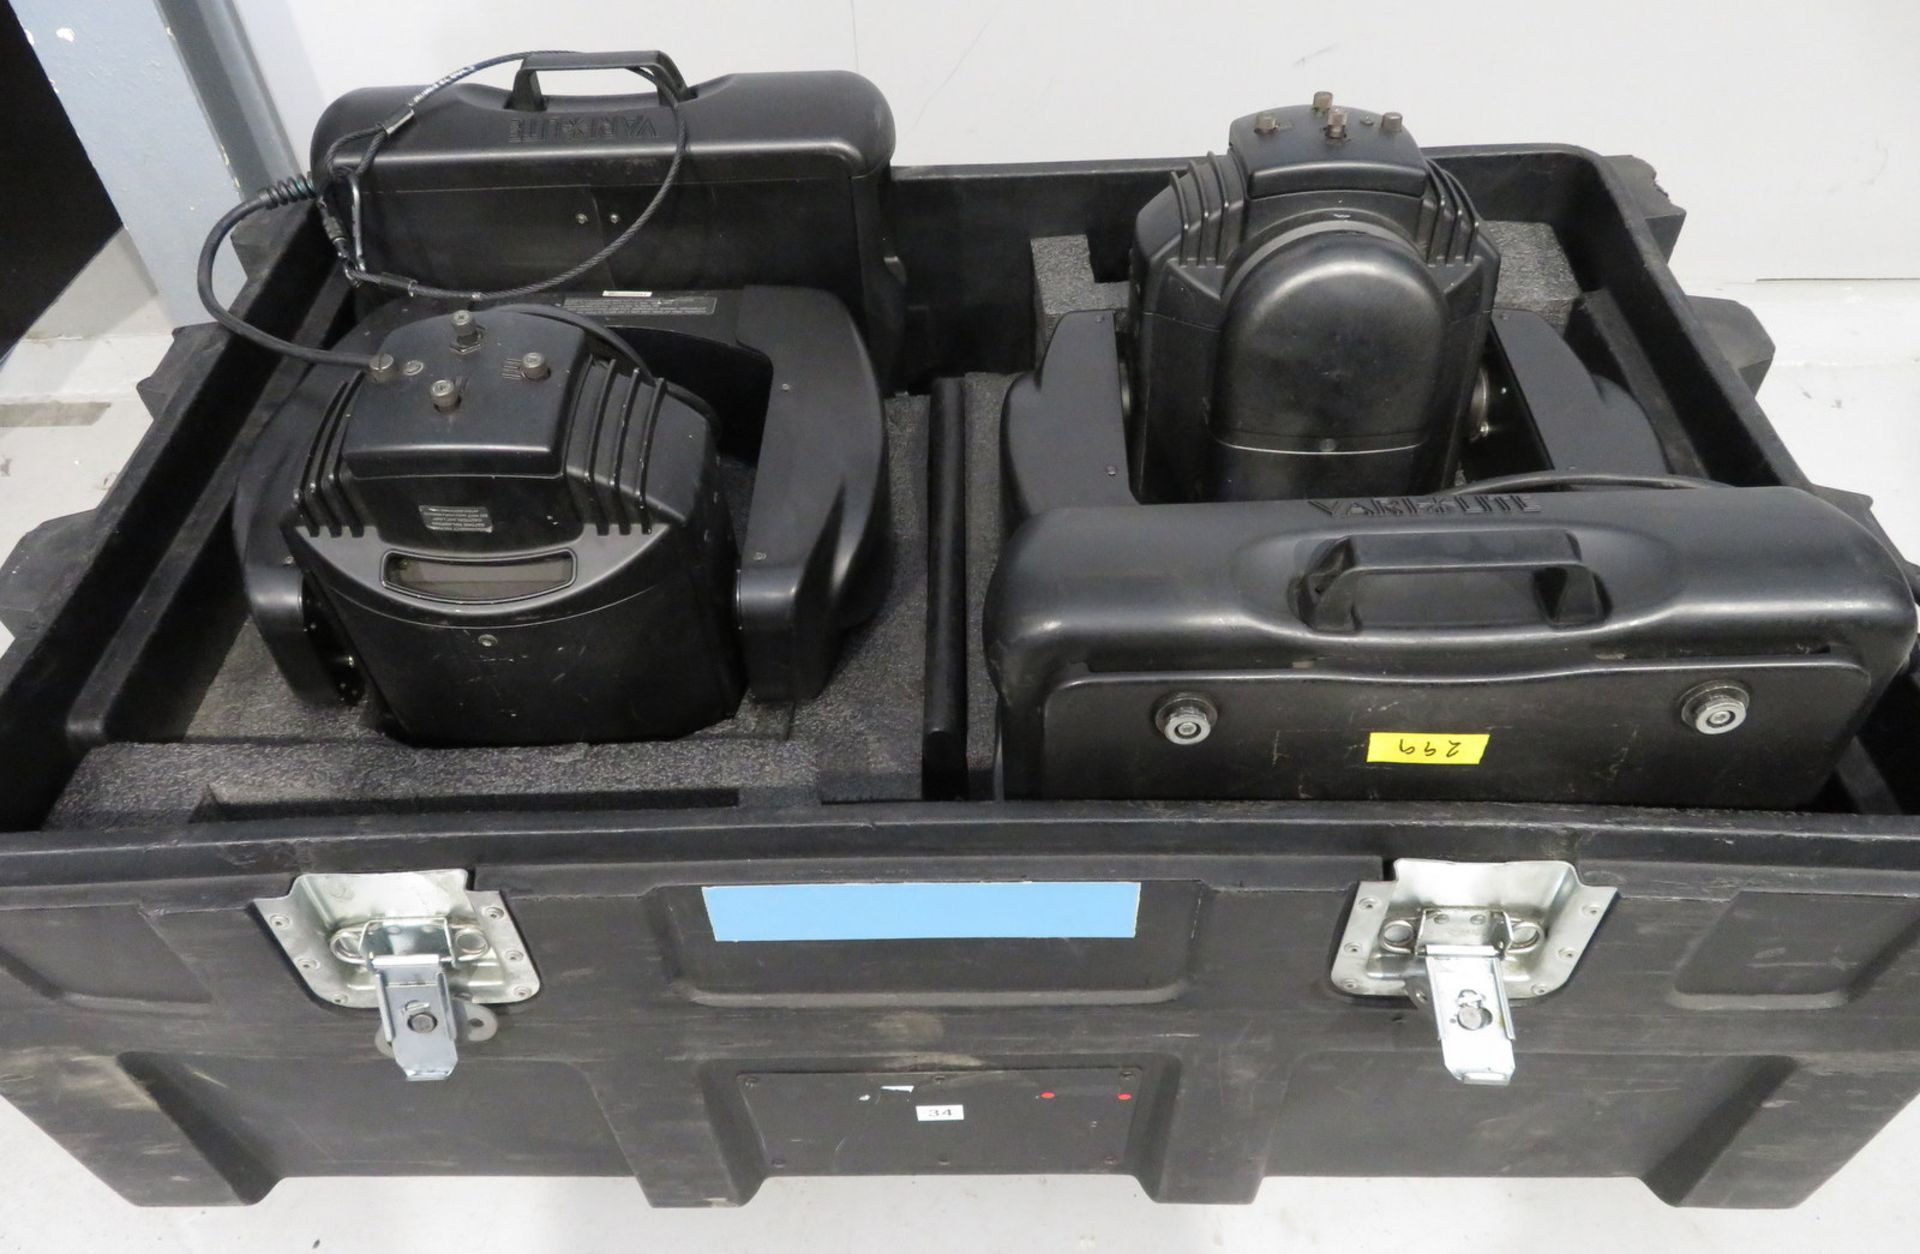 Pair of Varilite VL2402 Wash in flightcase. Includes hanging clamps and safety bonds. Work - Image 8 of 8